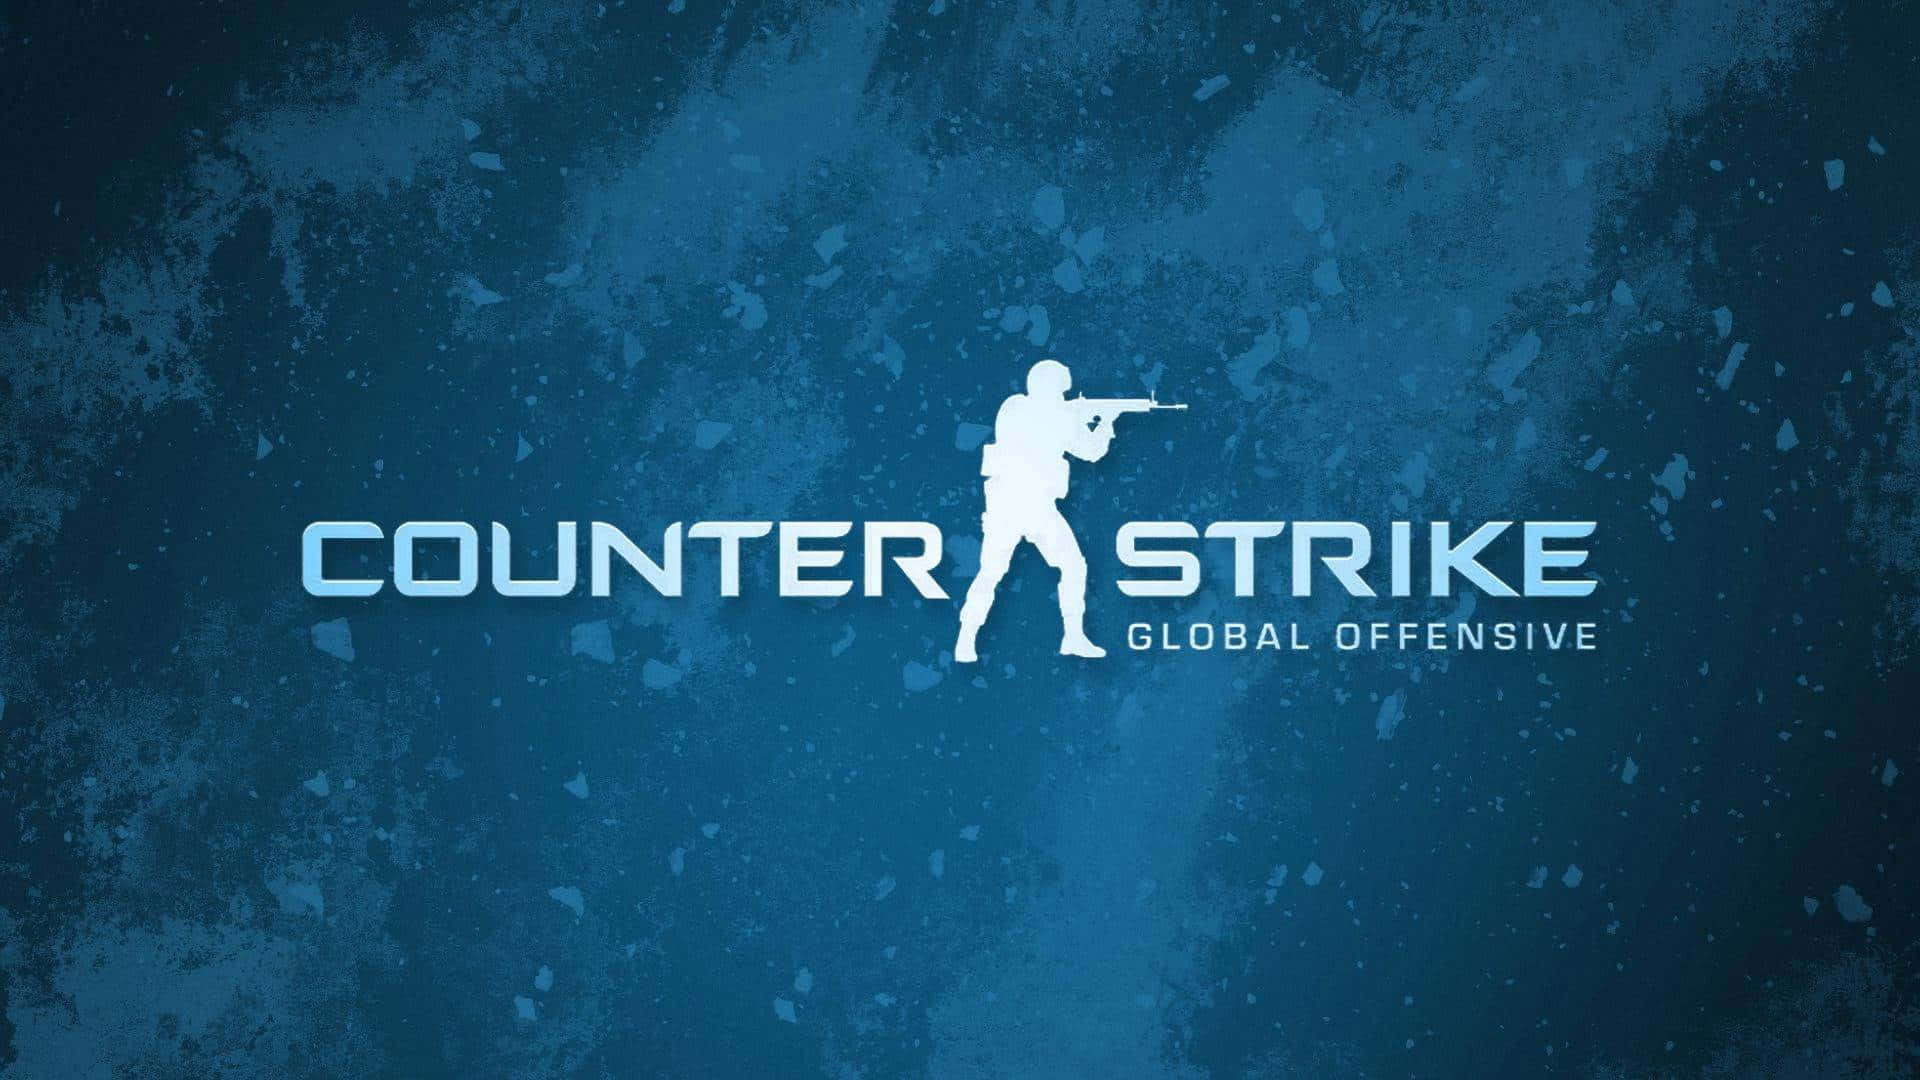 Go Pro in Counter Strike Global Offensive!